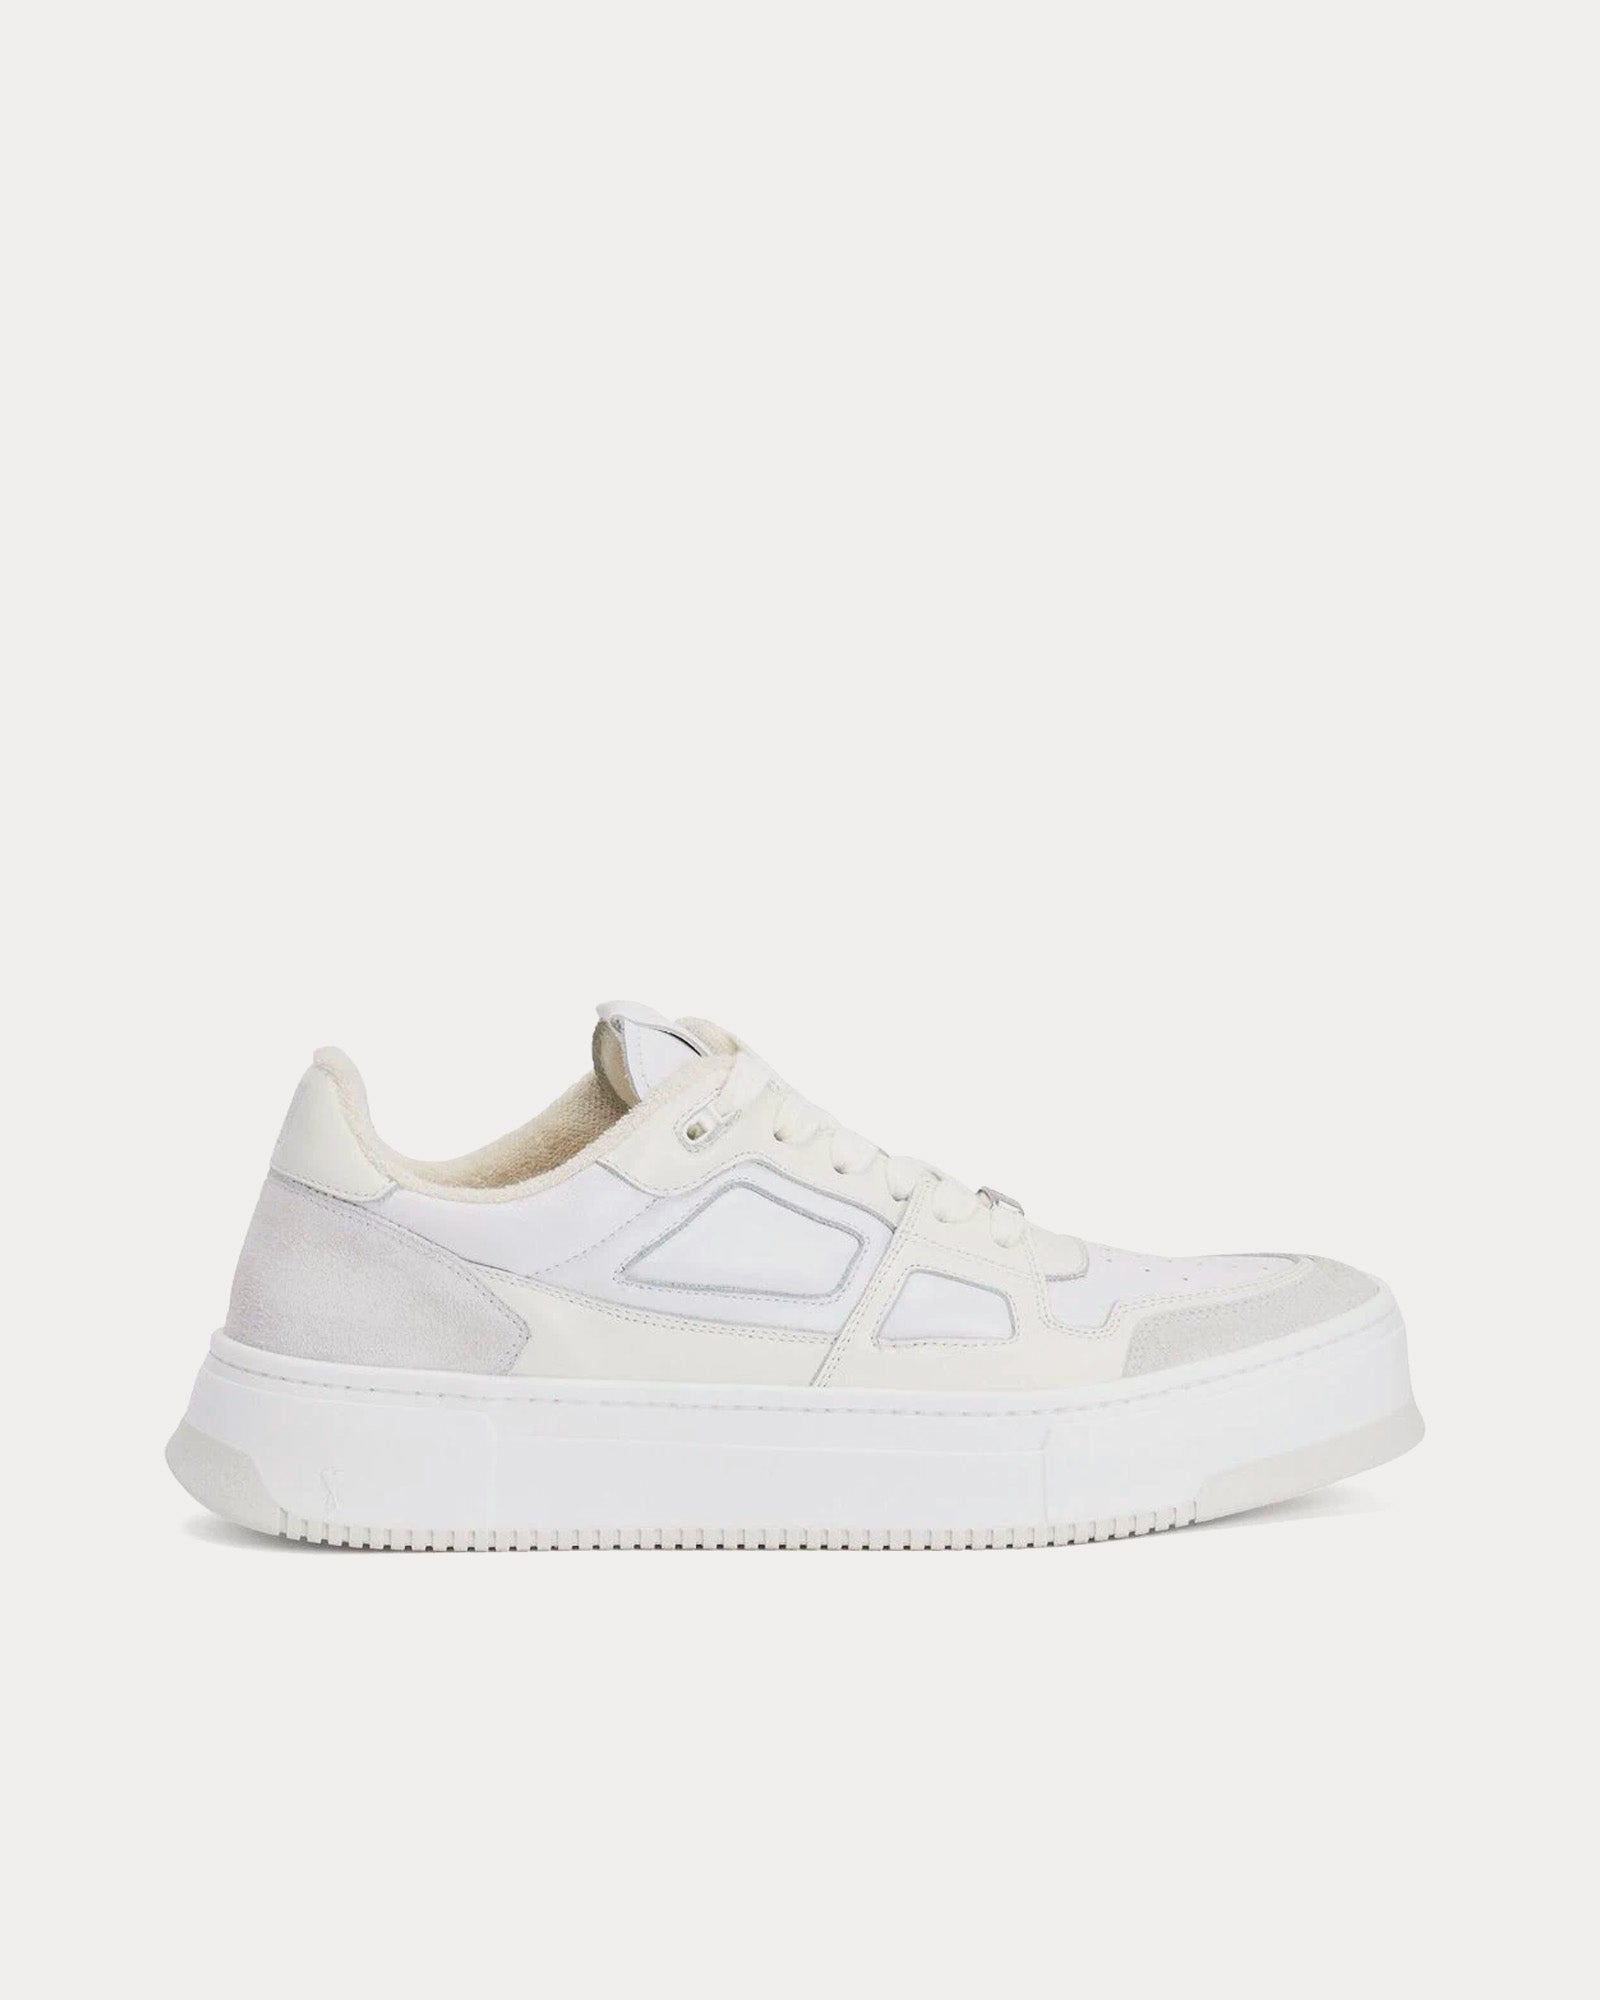 AMI - Arcade Leather White Low Top Sneakers